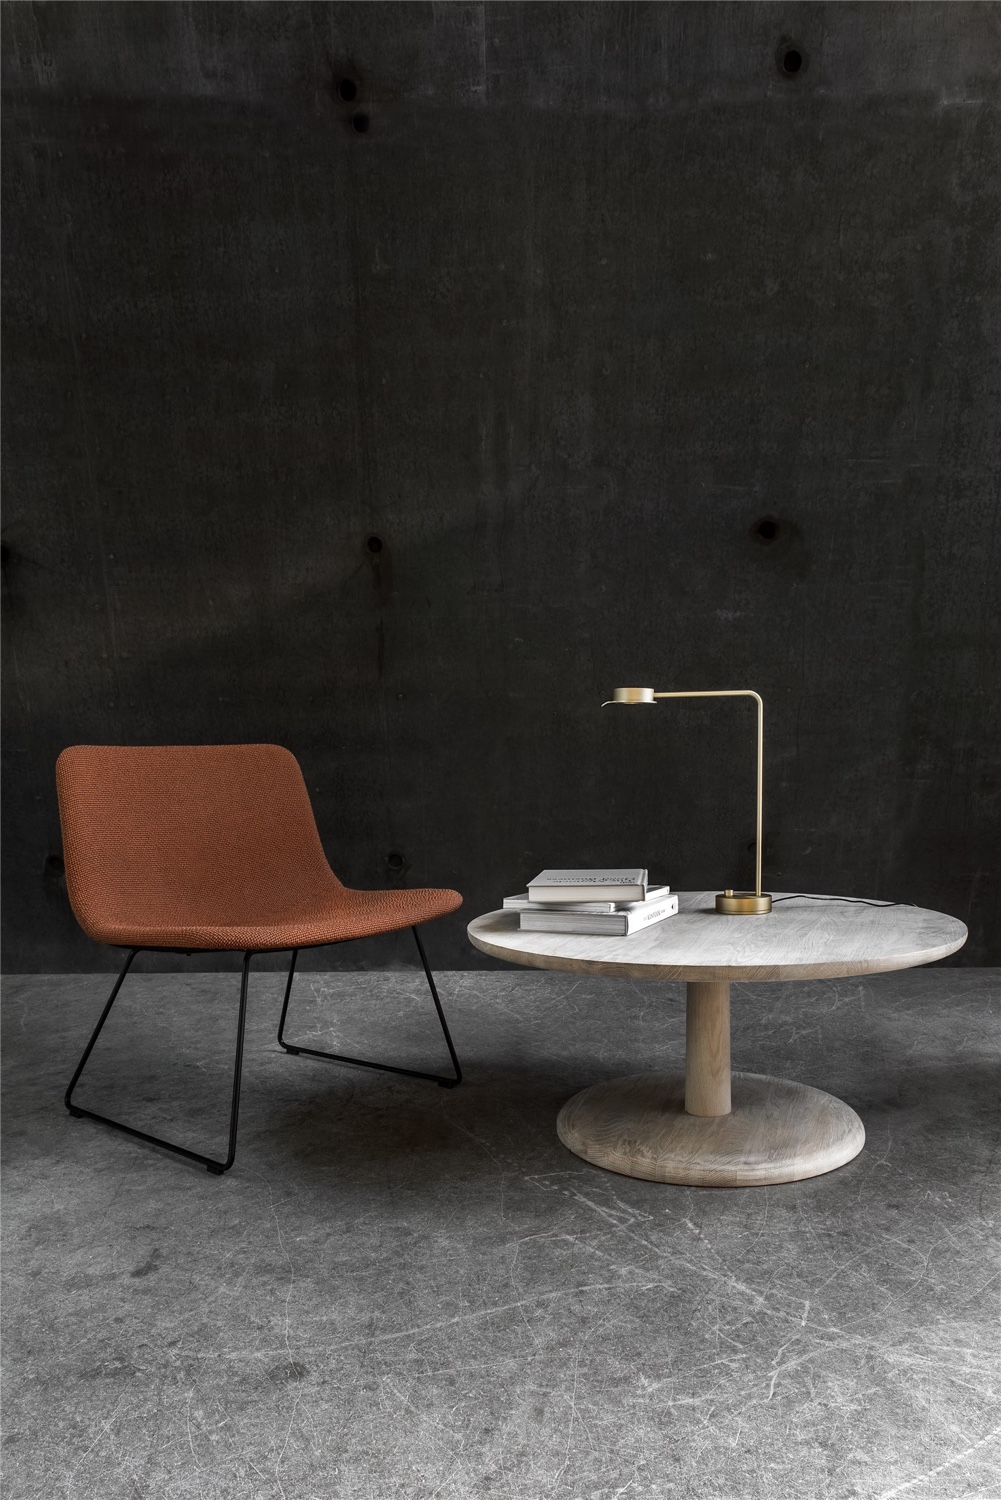 Pon (2016). With Pon there is no decoration or superfluous detail, just a table. Pon is available in several sizes and finishes and is manufactured by Fredericia.